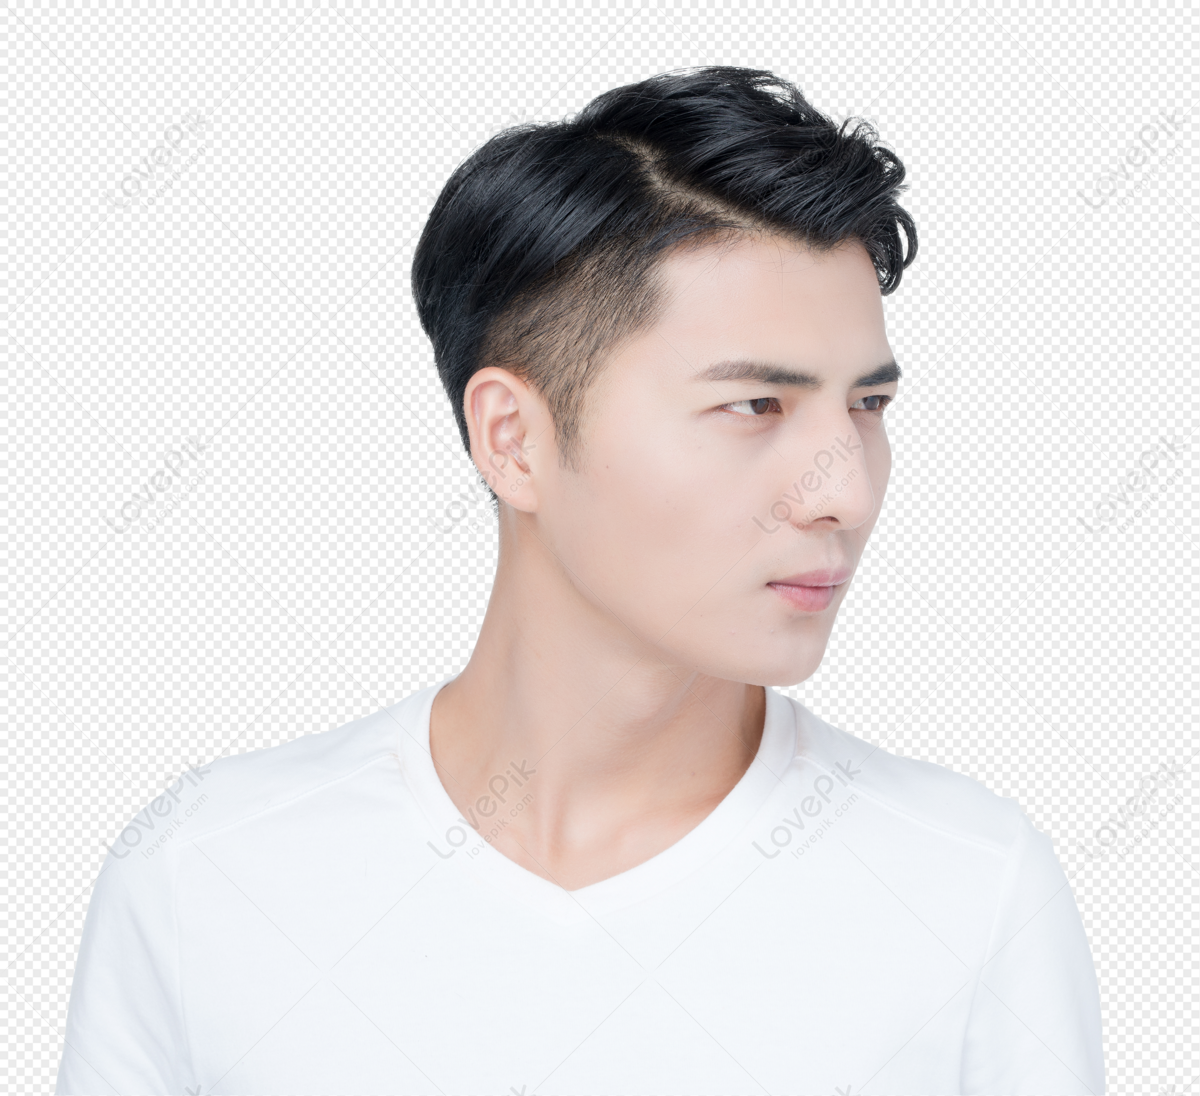 Man Face PNG Image HD - PNG All